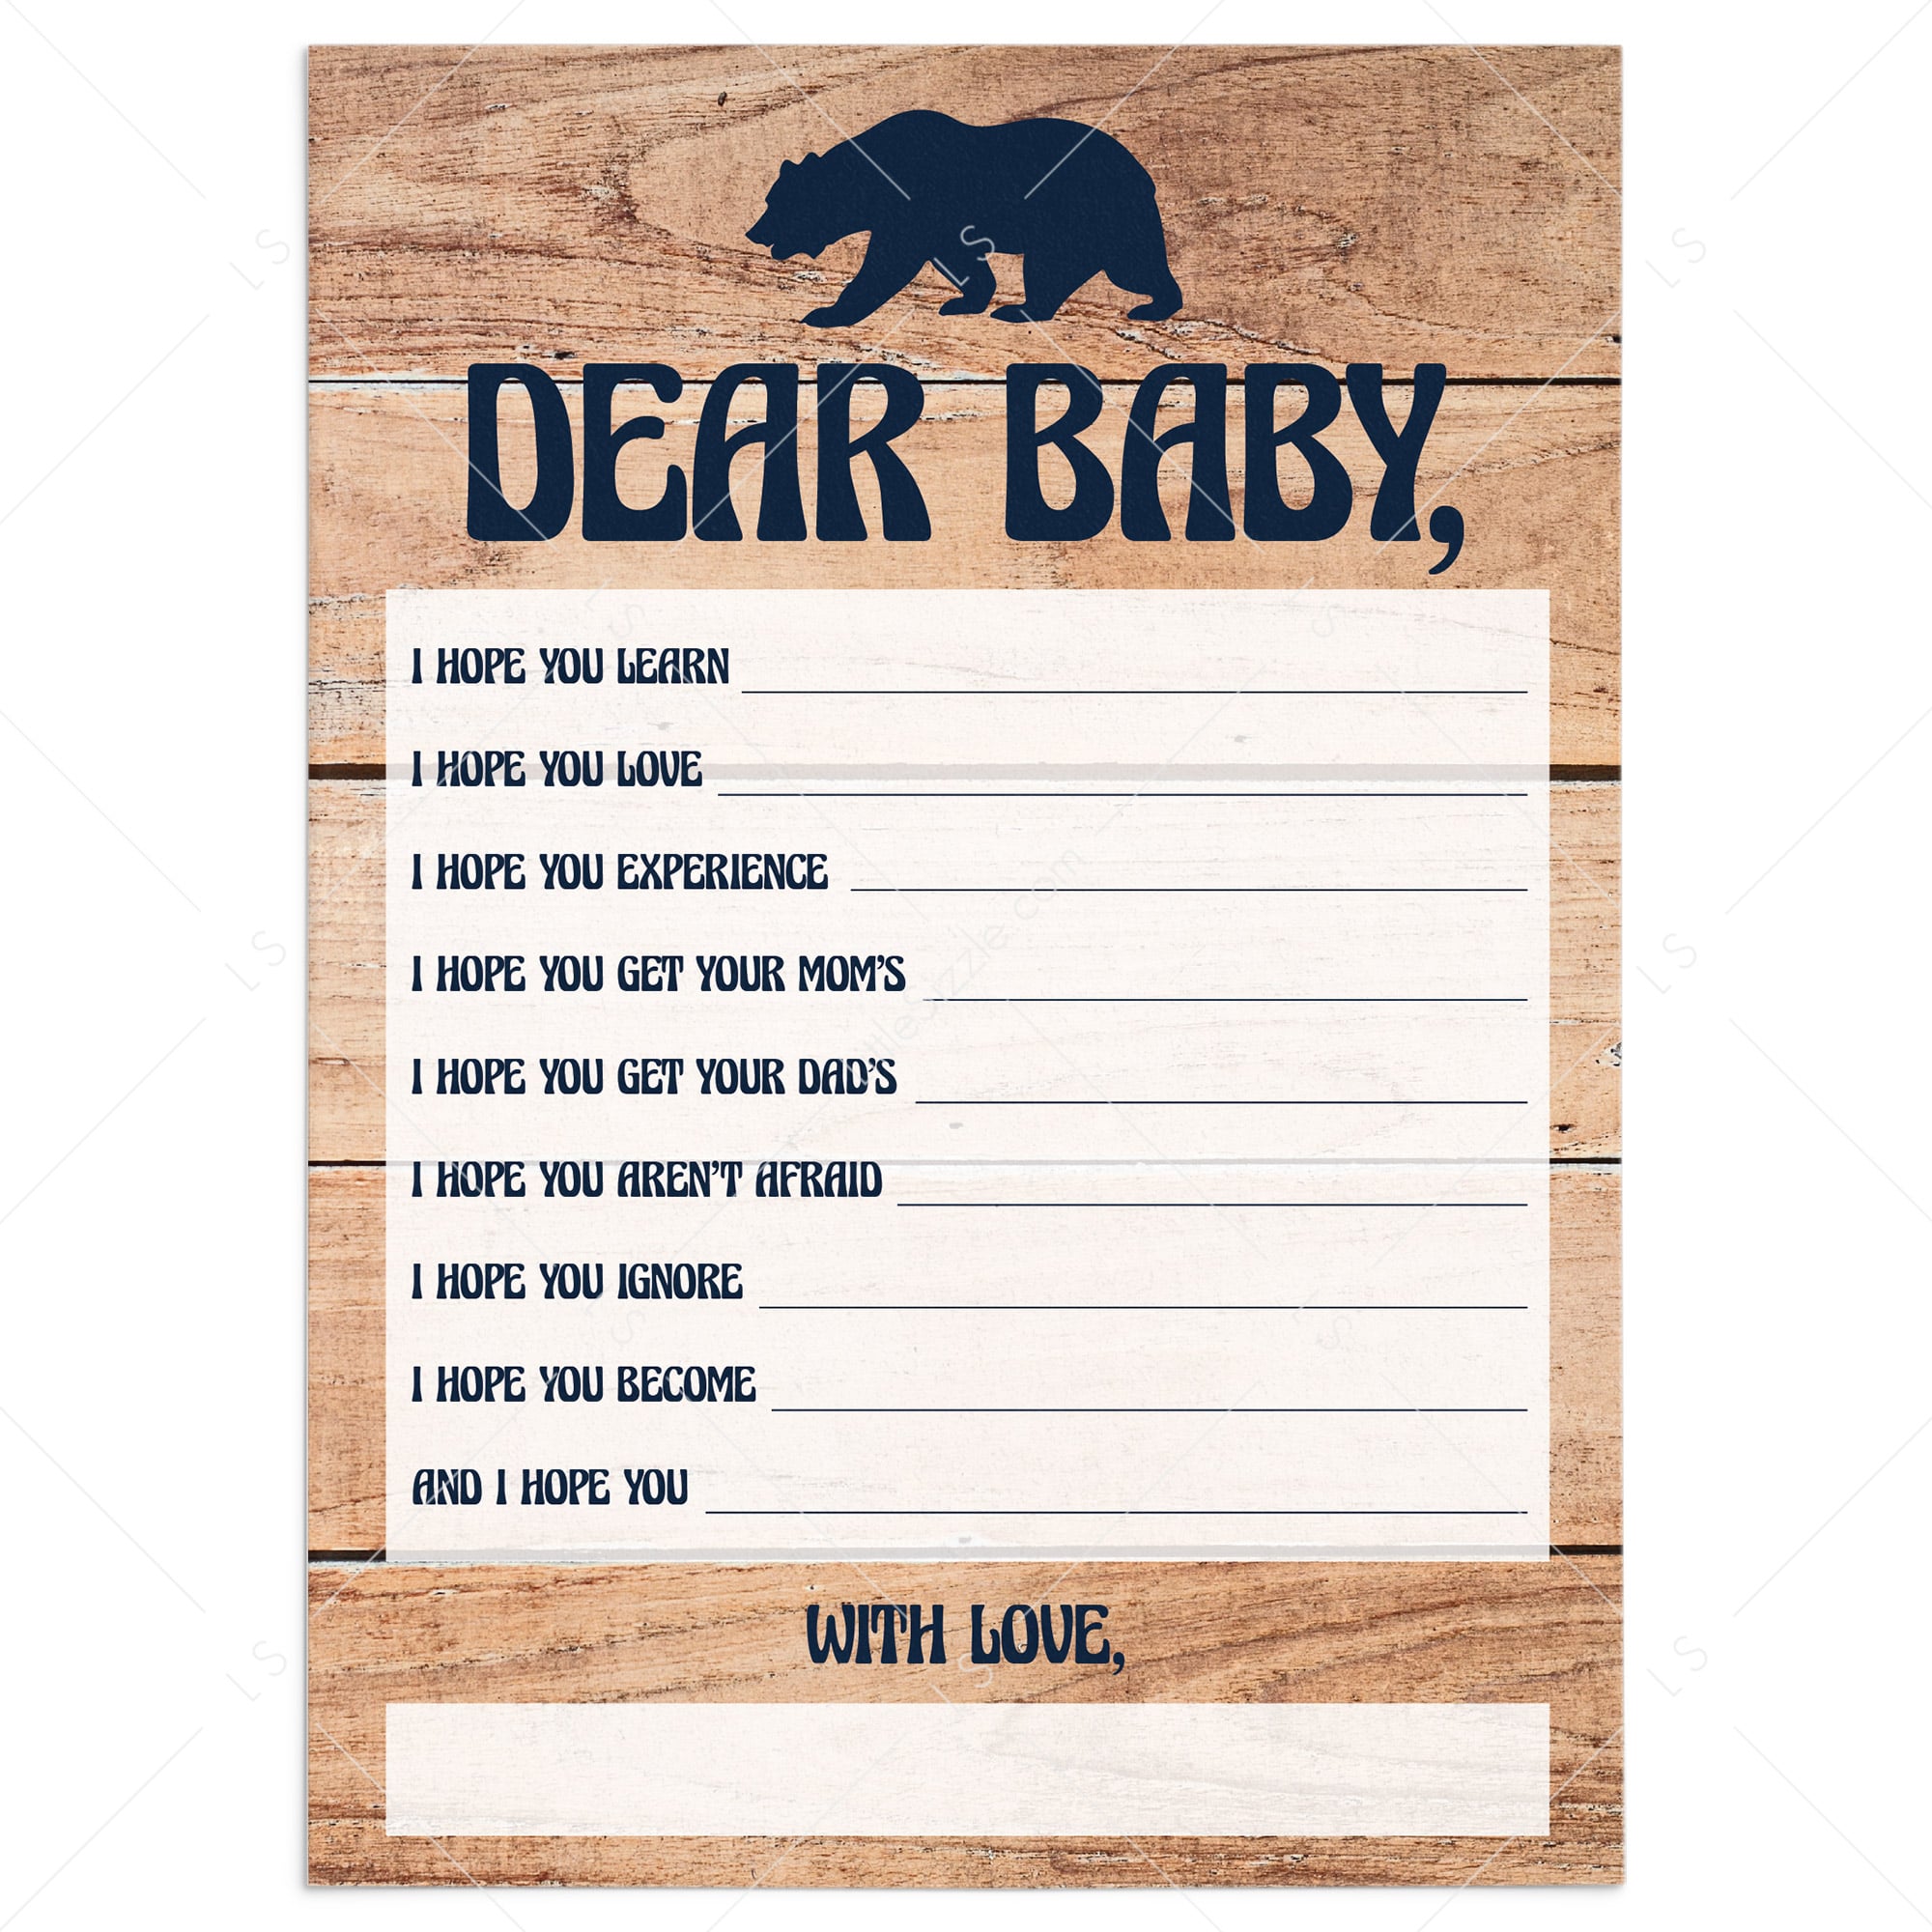 Bear baby shower games for boys by LittleSizzle